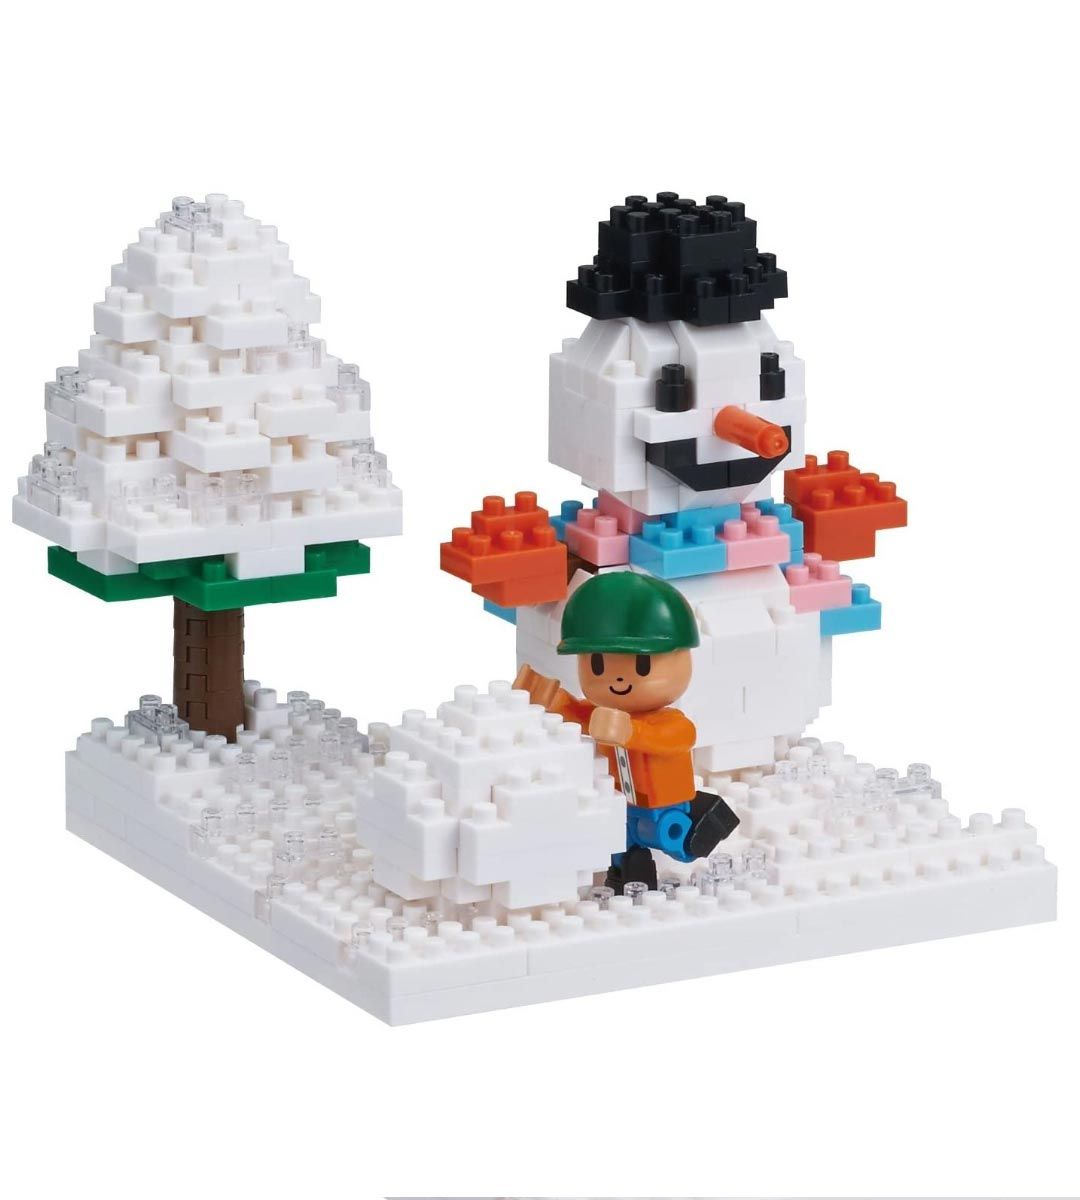 Nanoblock - playing with snow - Stories collection with nanobbit